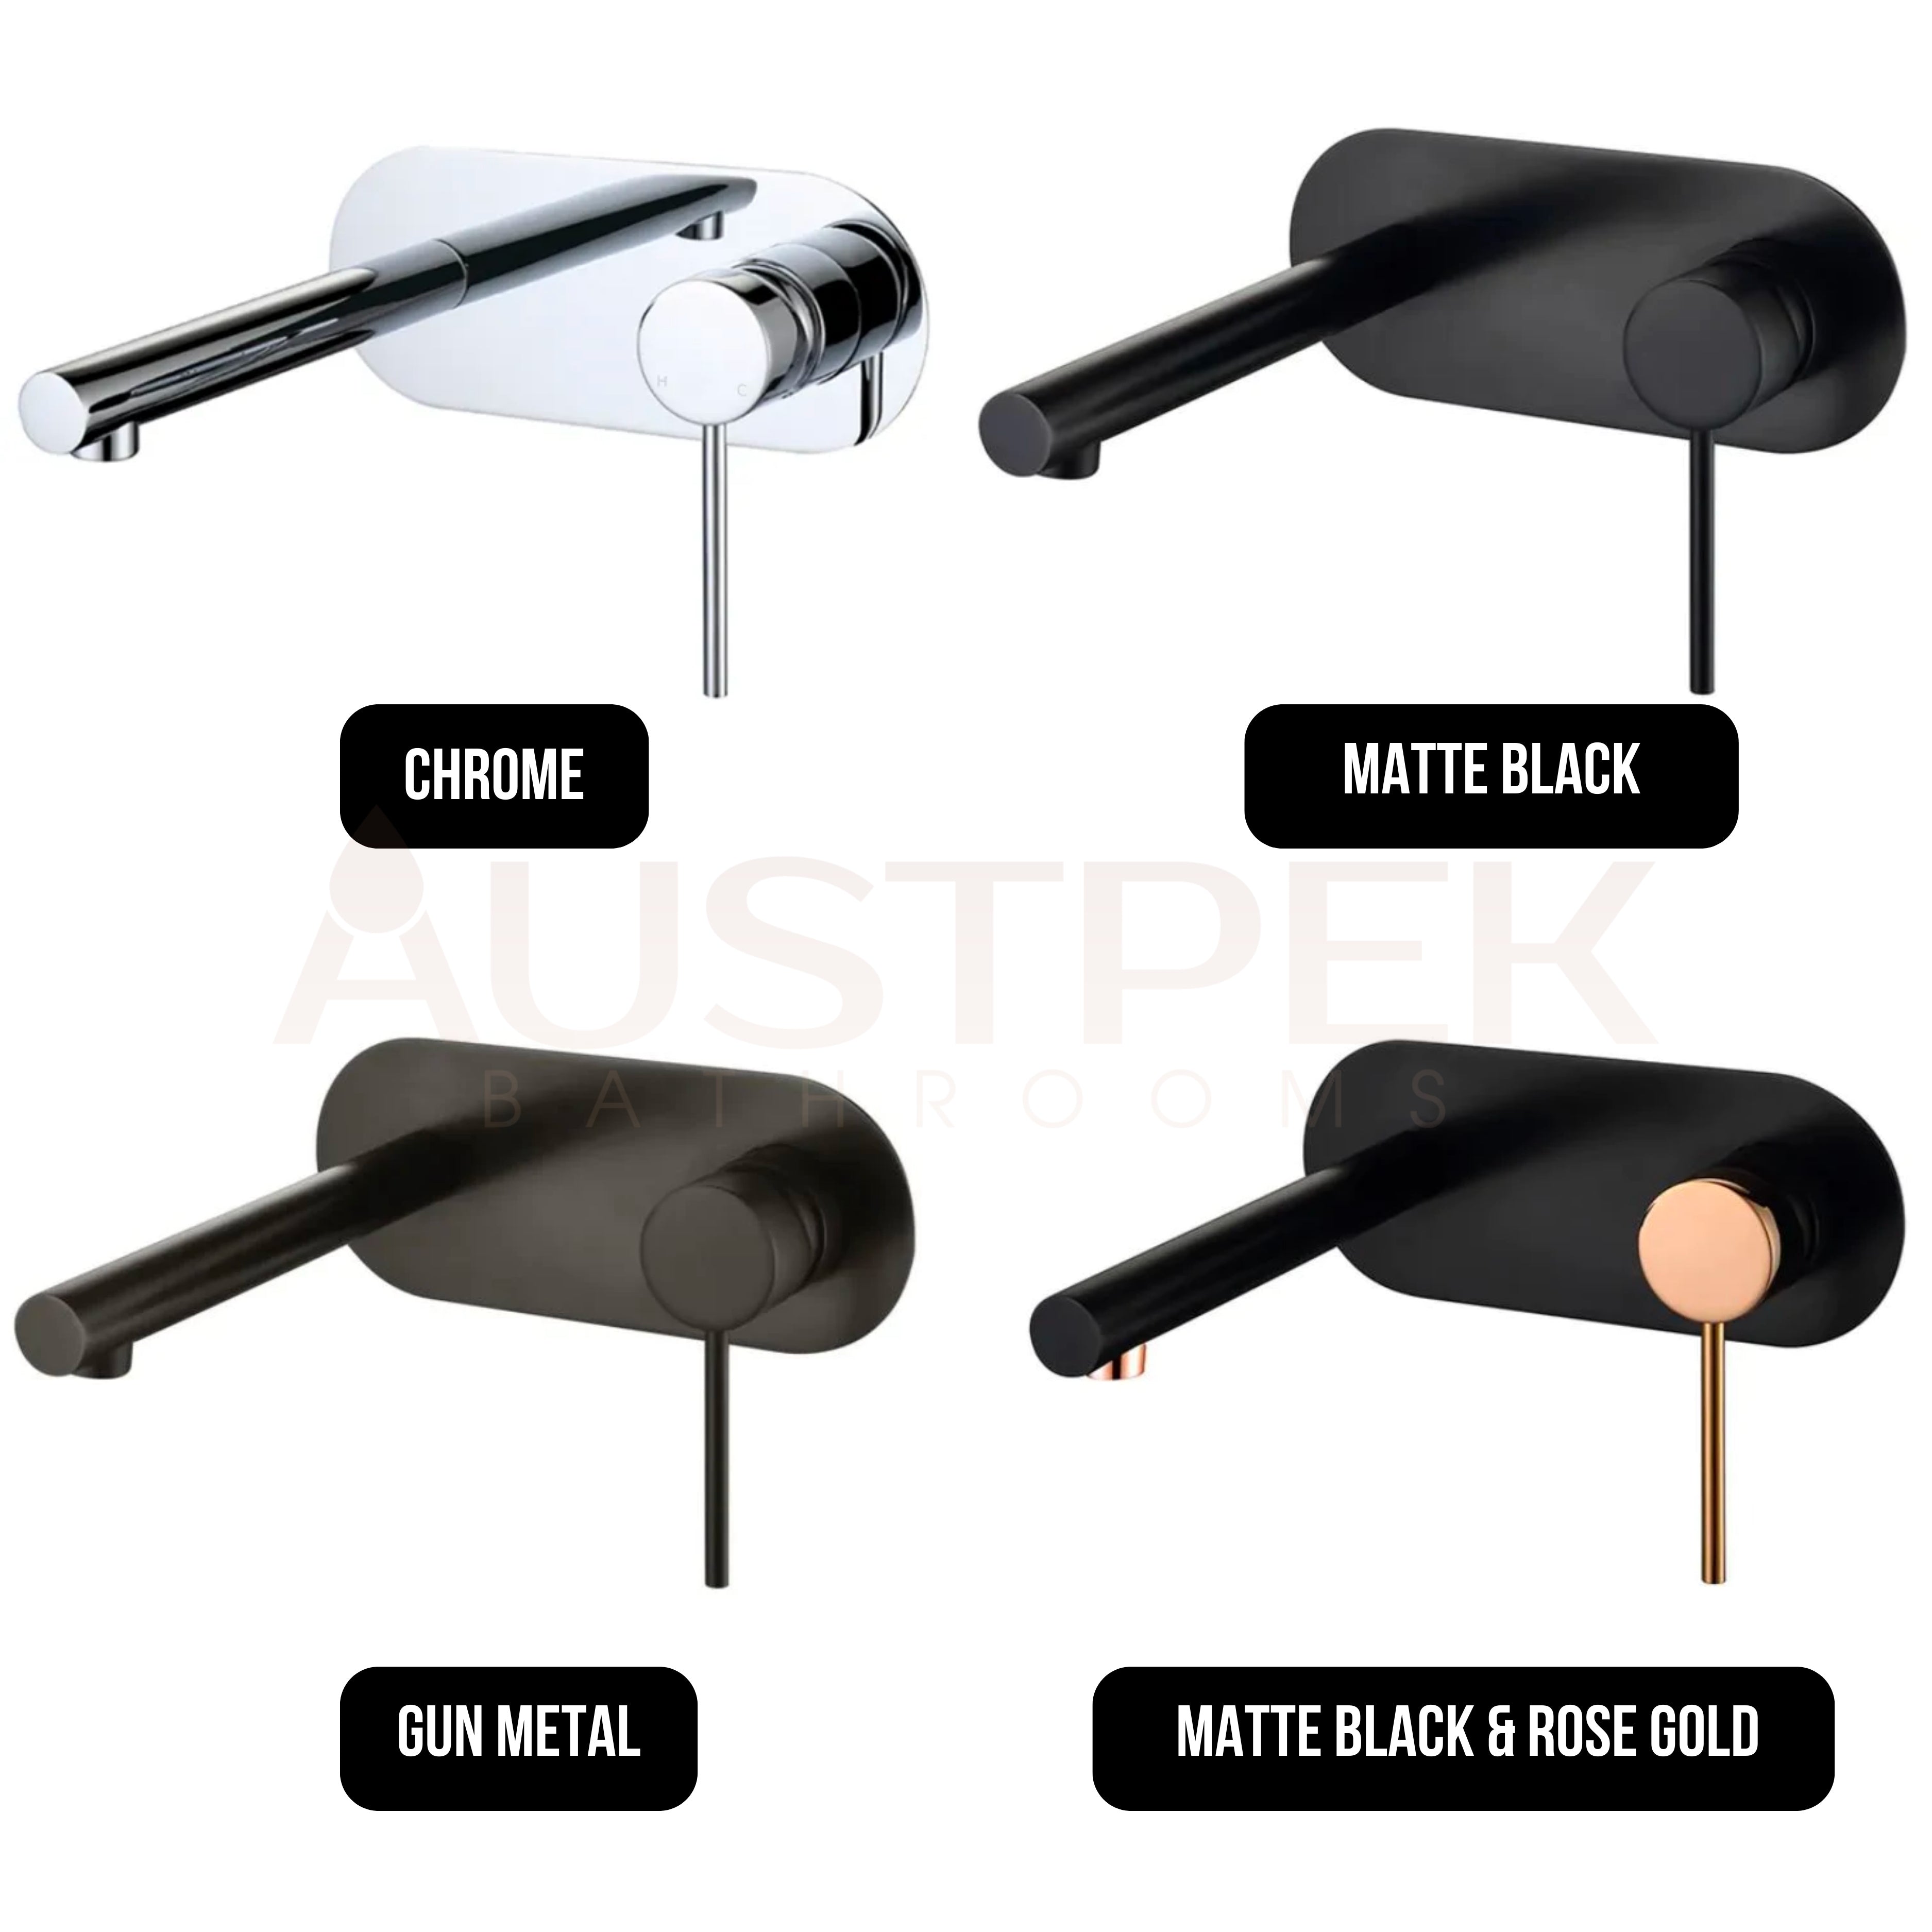 INSPIRE ROUL WALL BASIN MIXER MATTE BLACK AND ROSE GOLD